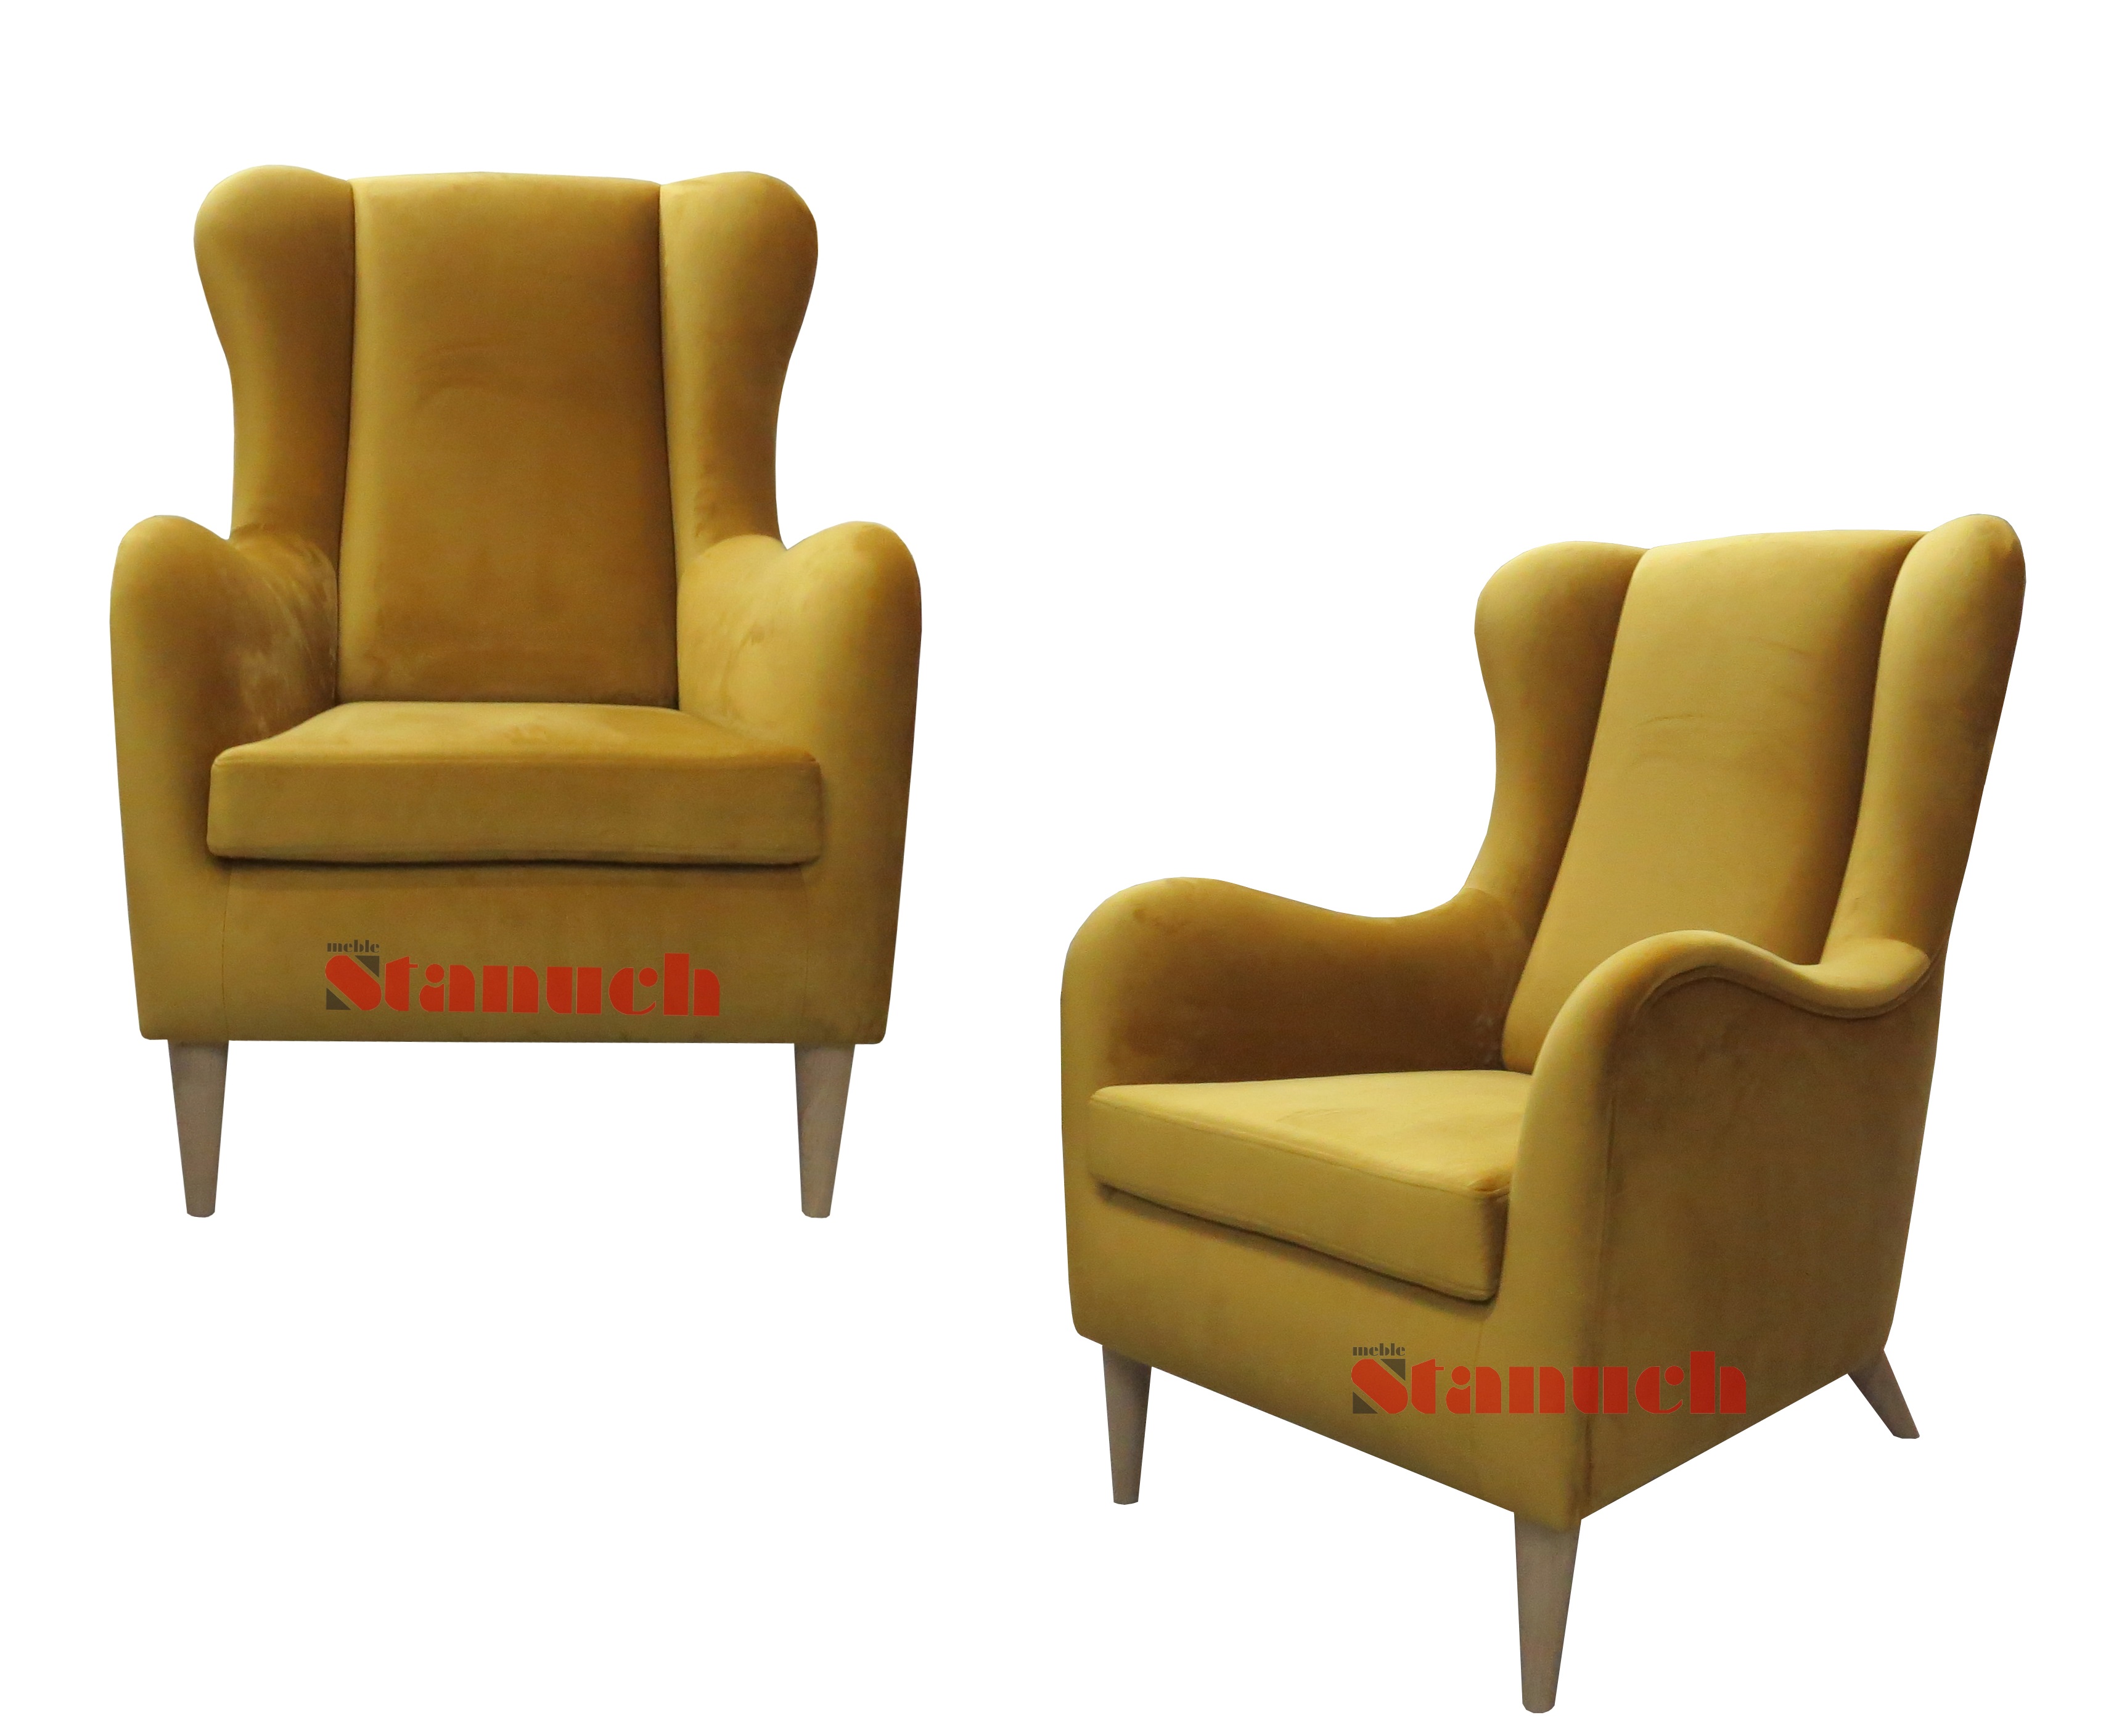 Upholstered armchairs with three factors